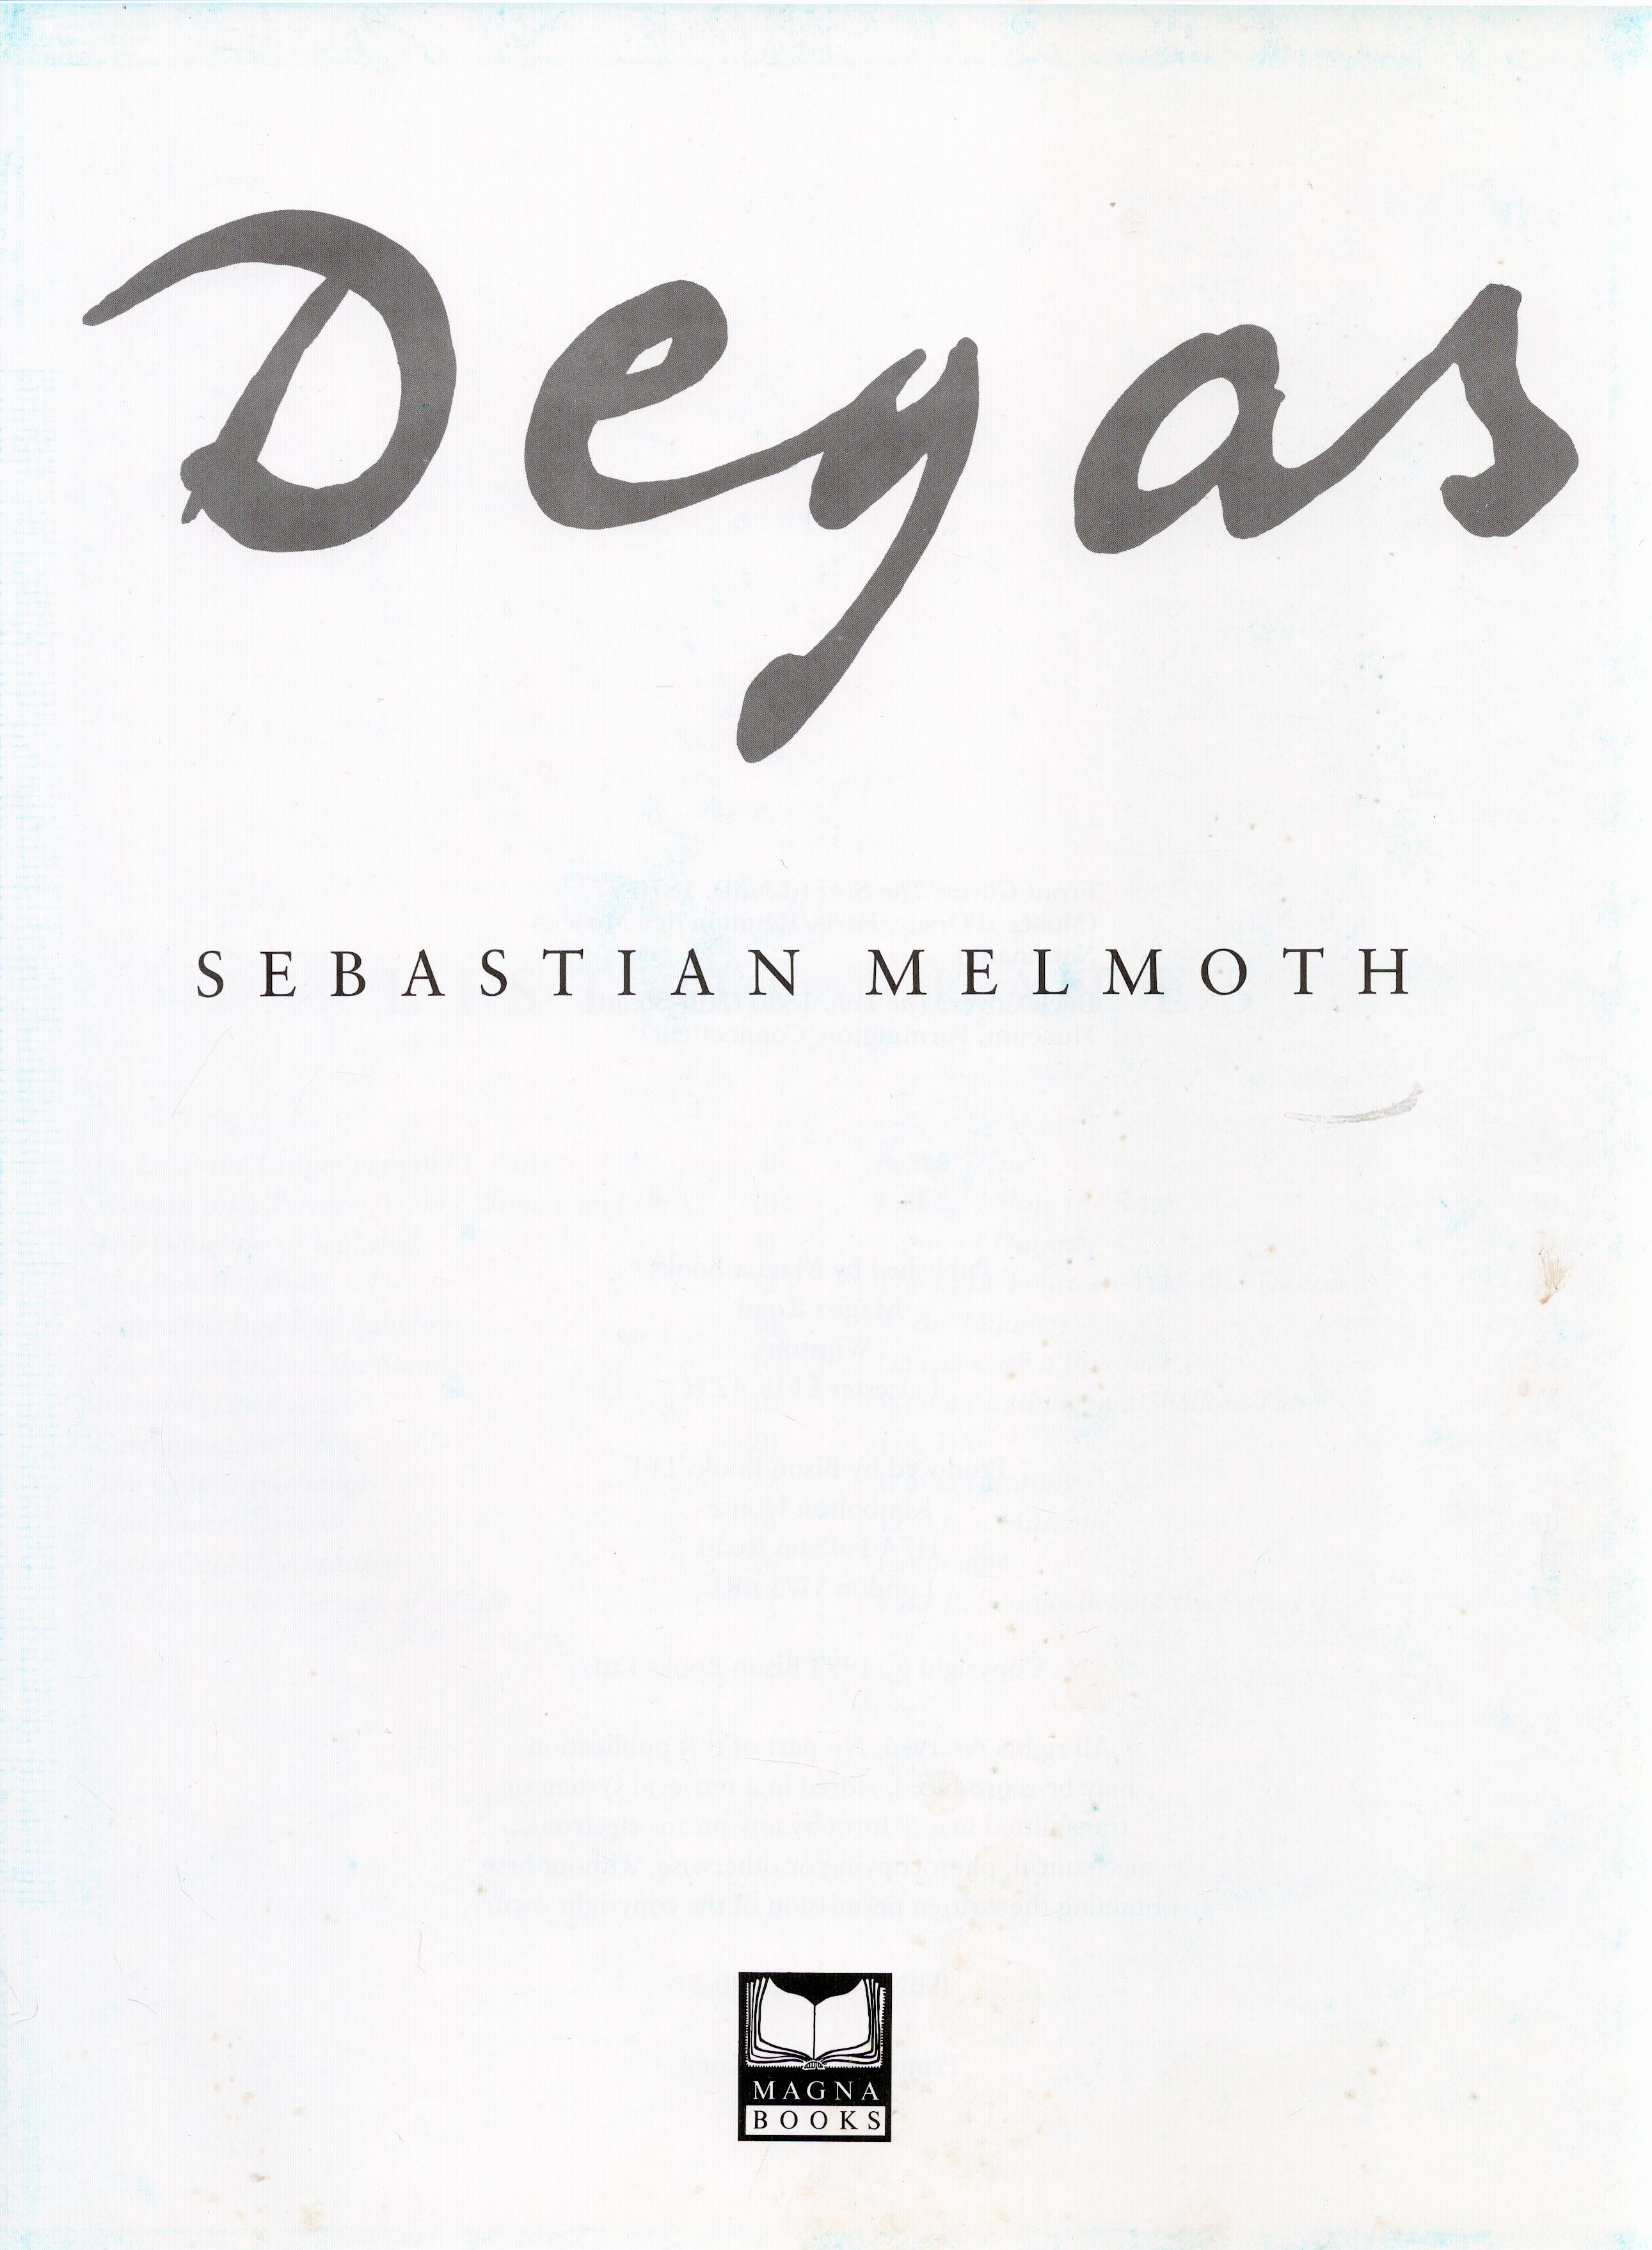 Degas by Sebastian Melmoth Hardback Book 1993 First Edition published by Magna Books some ageing - Image 2 of 3